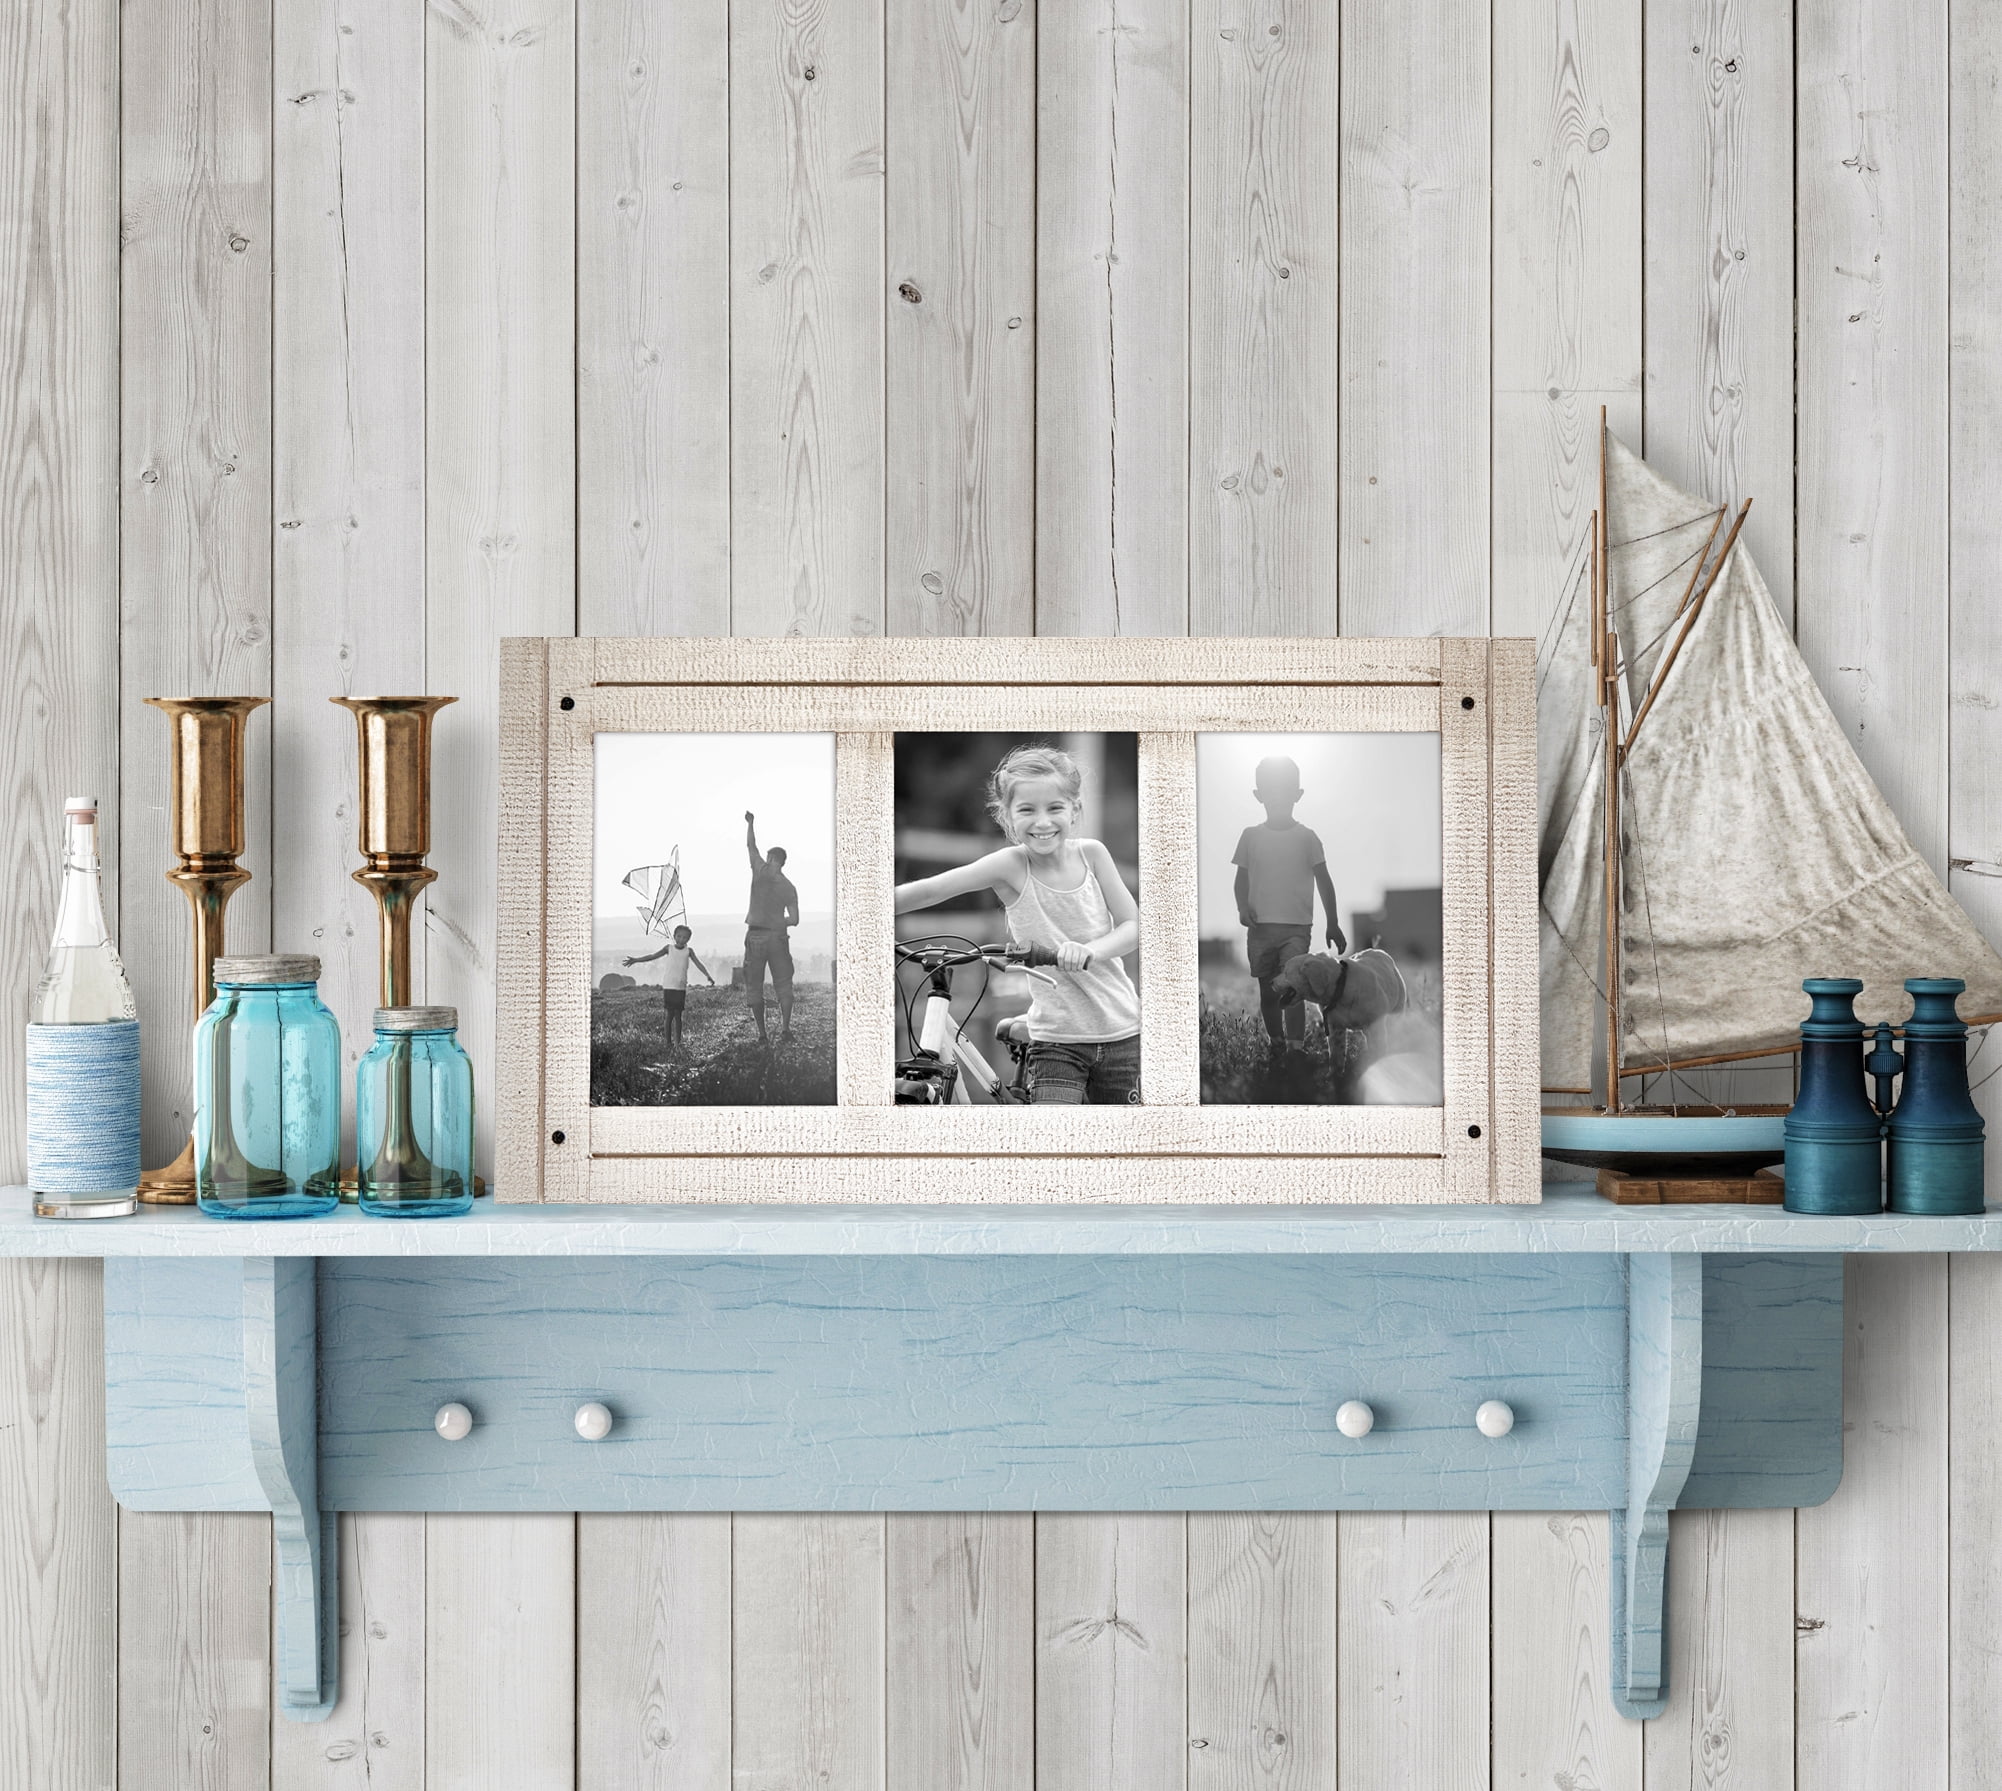 DDaoty 4X6 Picture Frames Set of 4 White - Made of Solid Wood Wooden Photo  Frames with High Definition Real Glass for Tabletop or Wall Display, 4